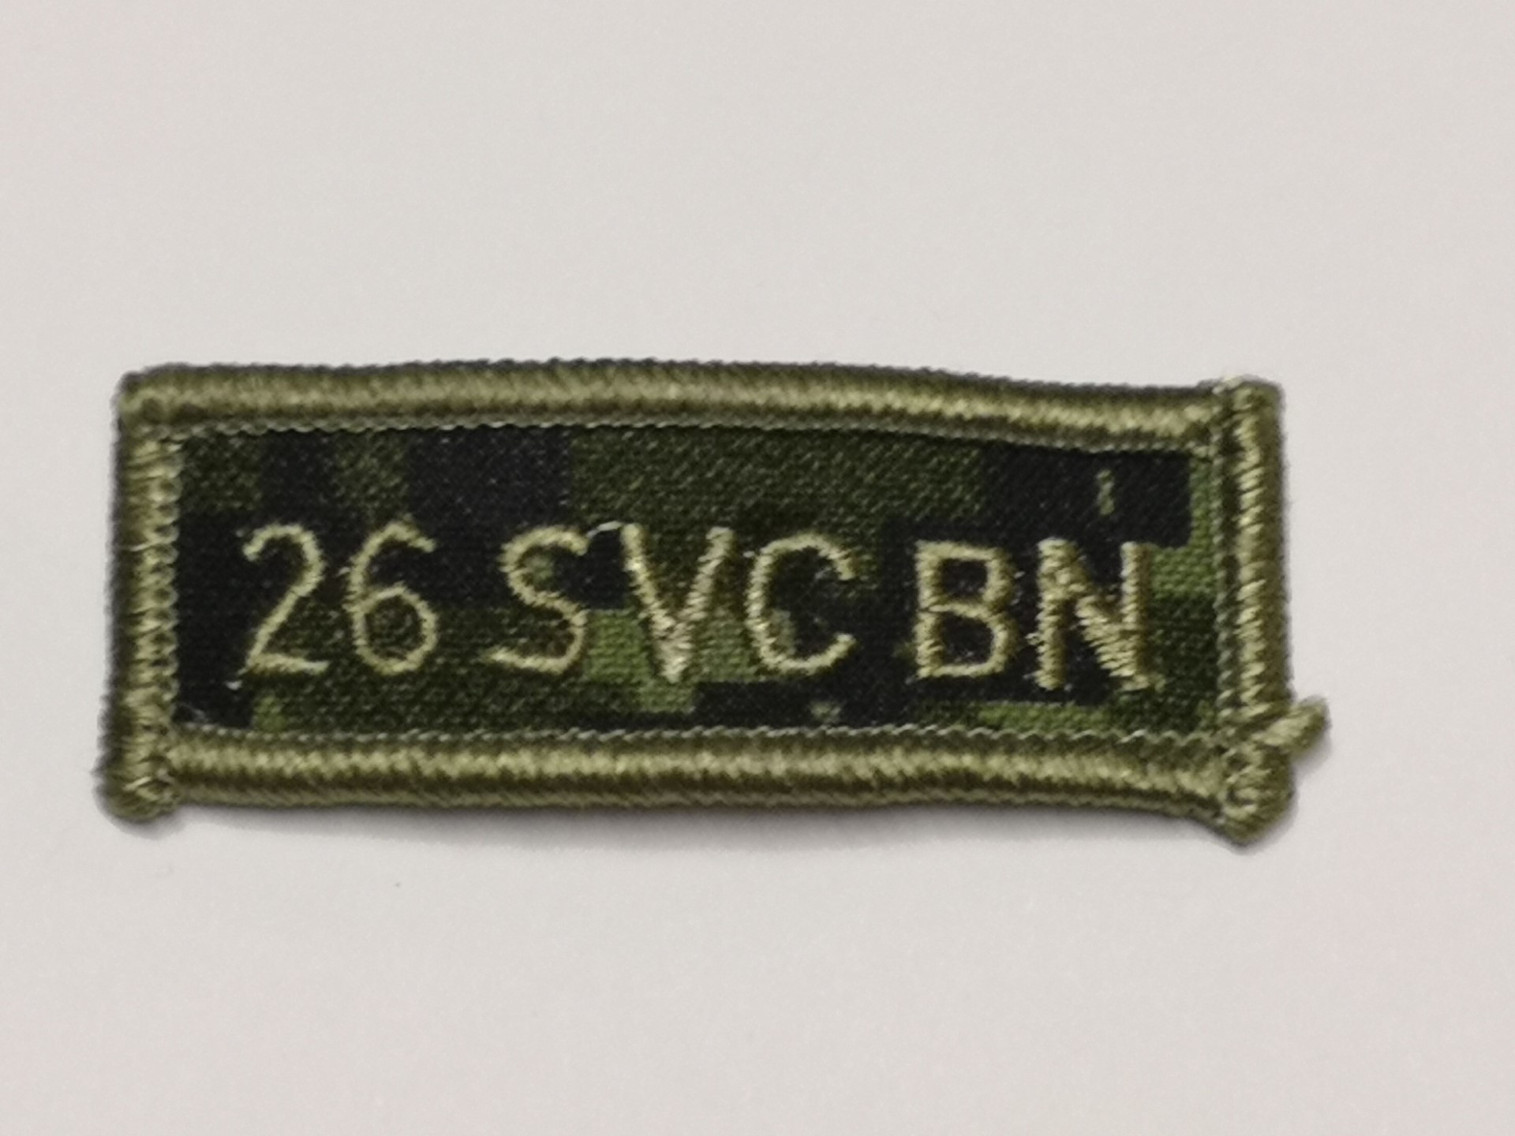 Canadian Armed Forces Cadpat Regiment Tab - 26 SVC BN